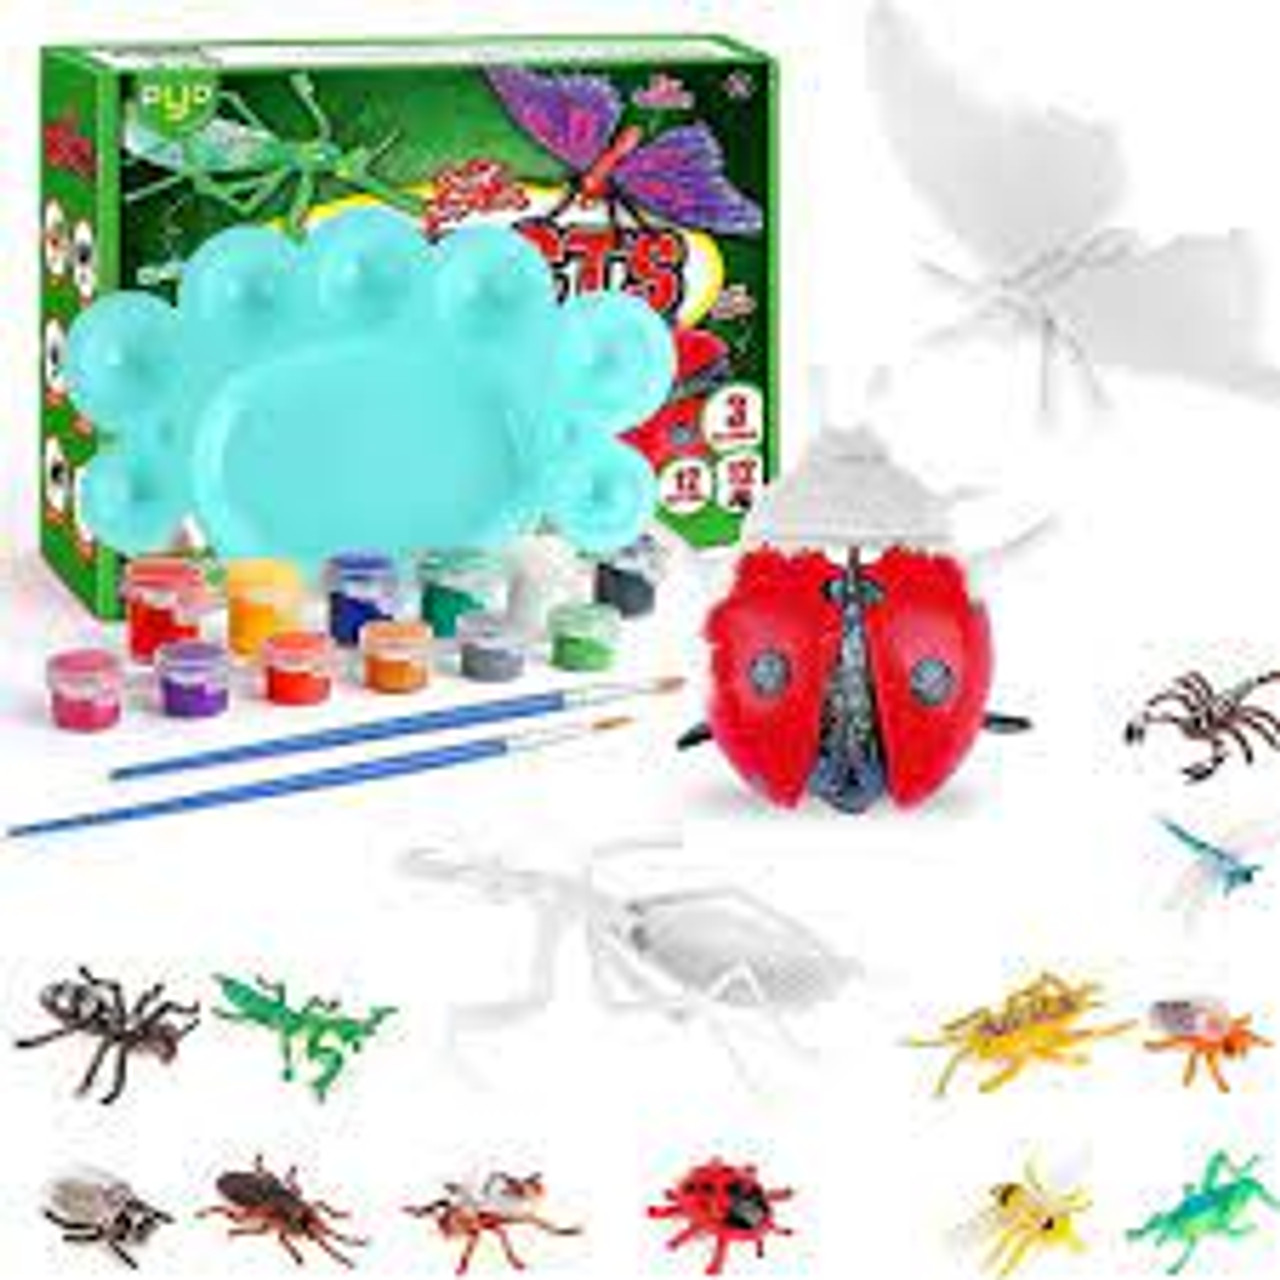 PAINT YOUR OWN INSECTS